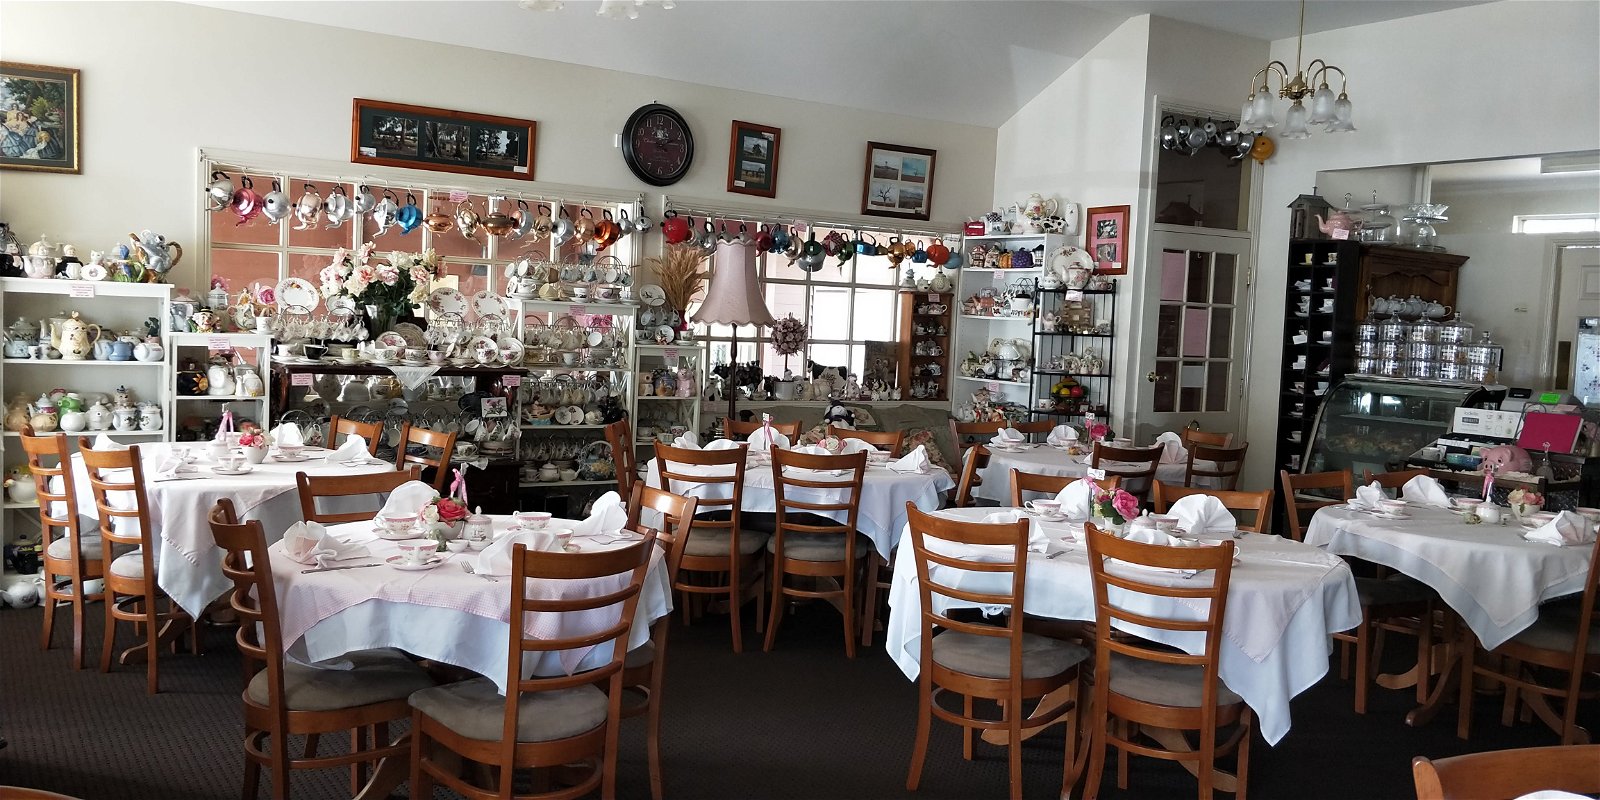 Moments   Memories Tea Room - New South Wales Tourism 